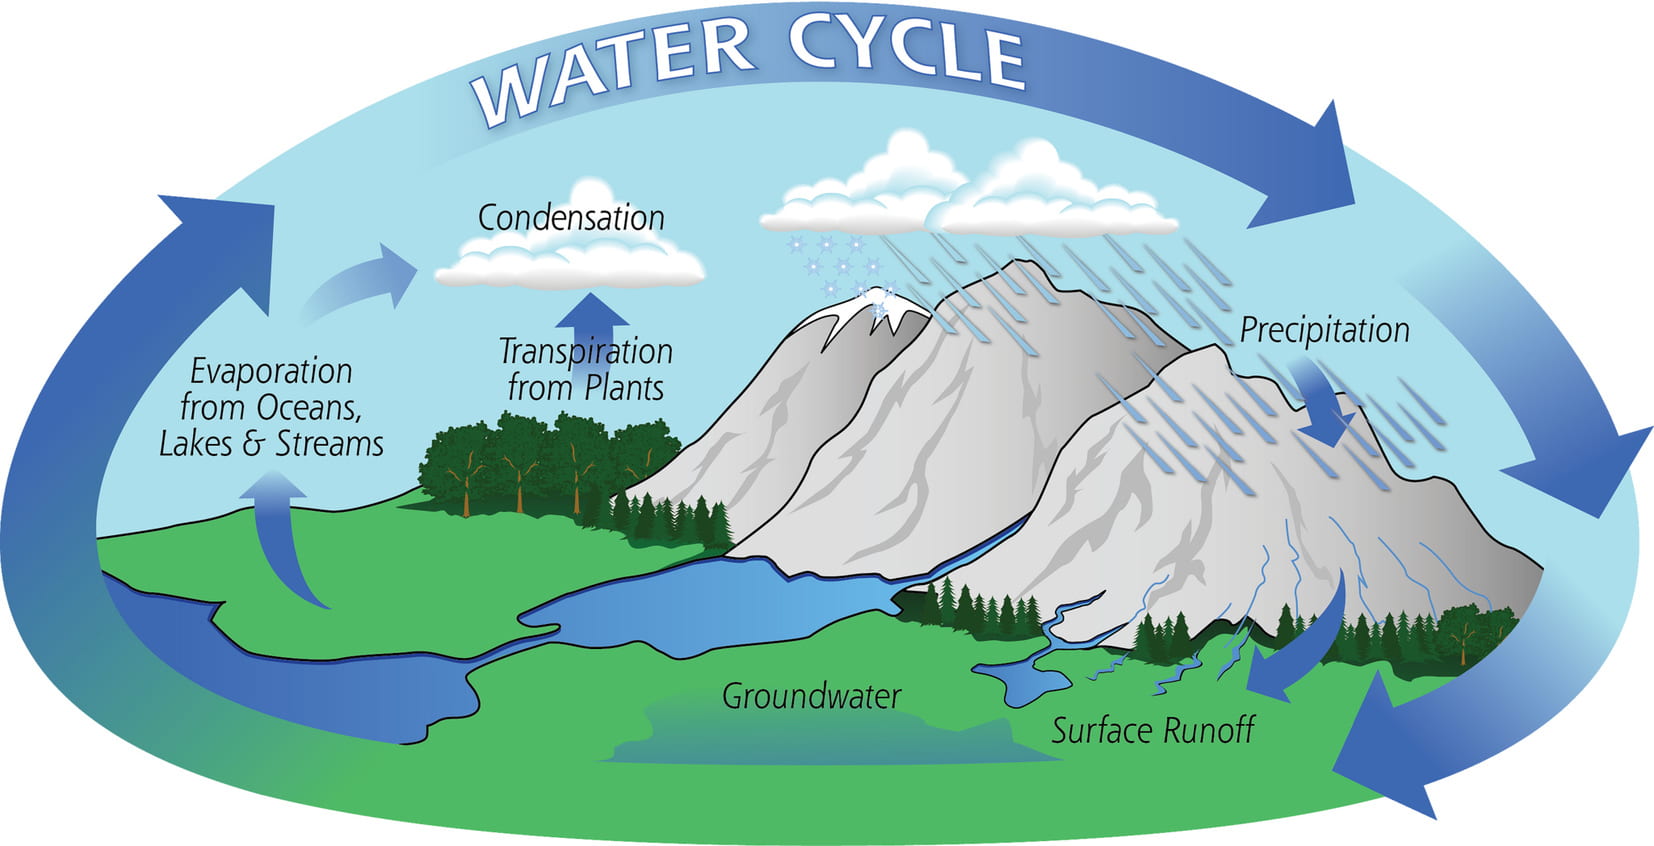 An image of the water cycle